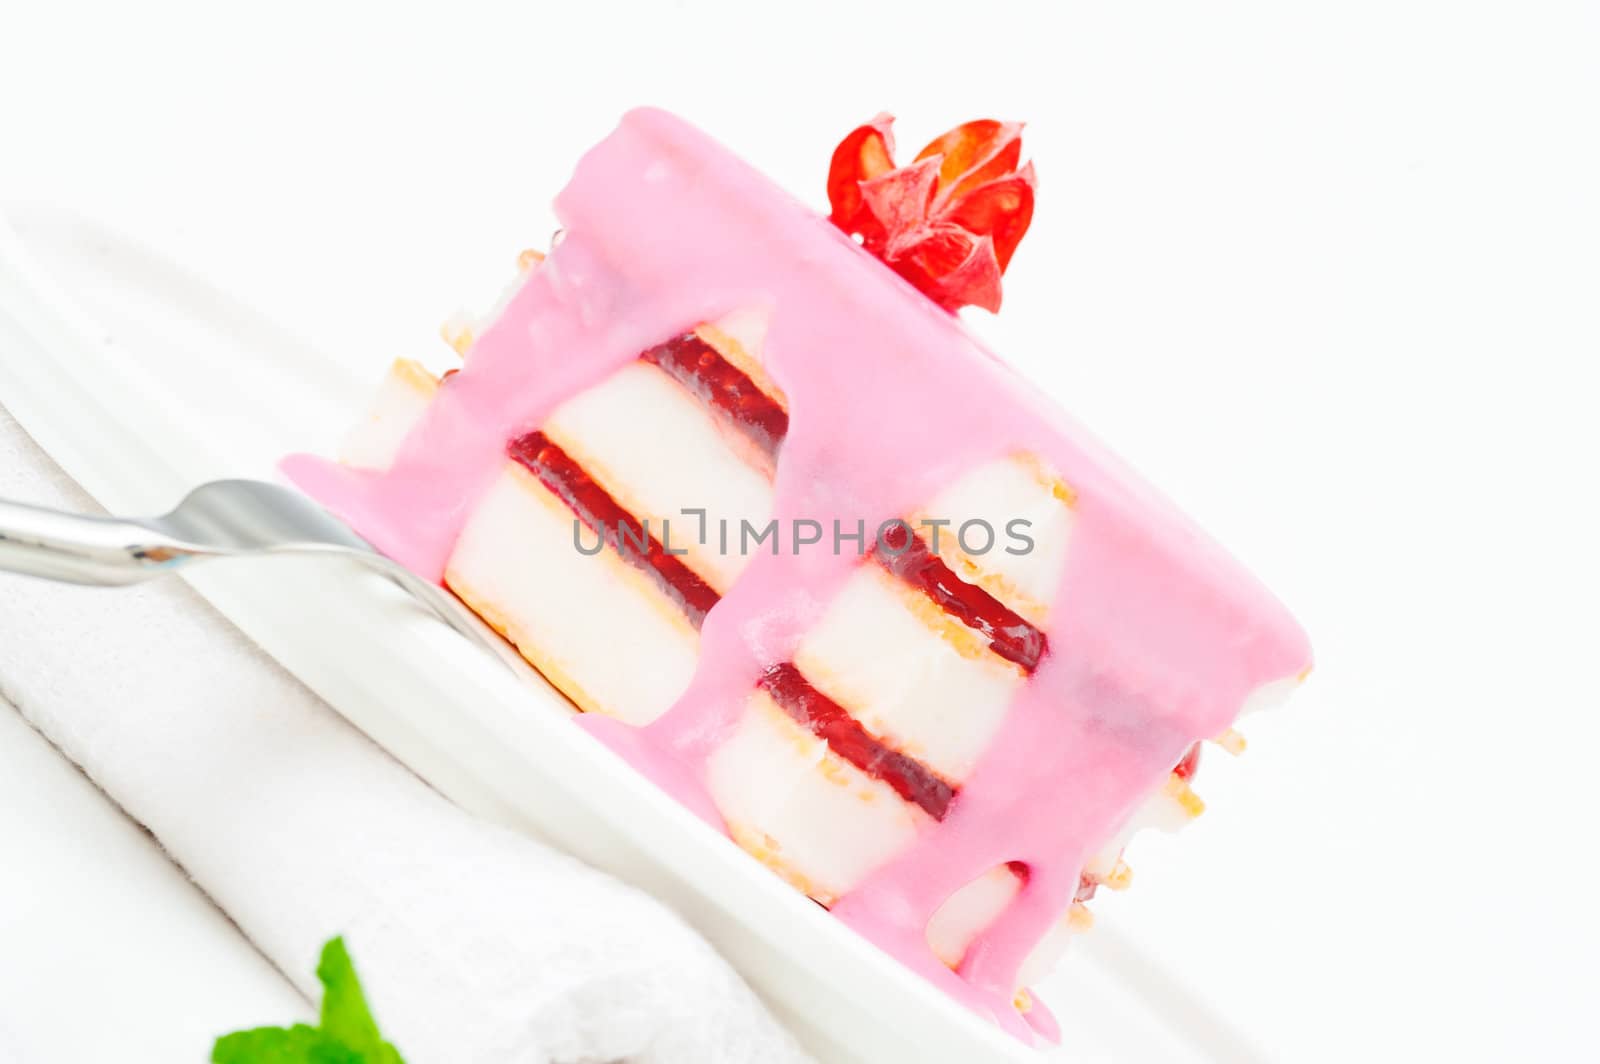 Small cakes with a pink icing